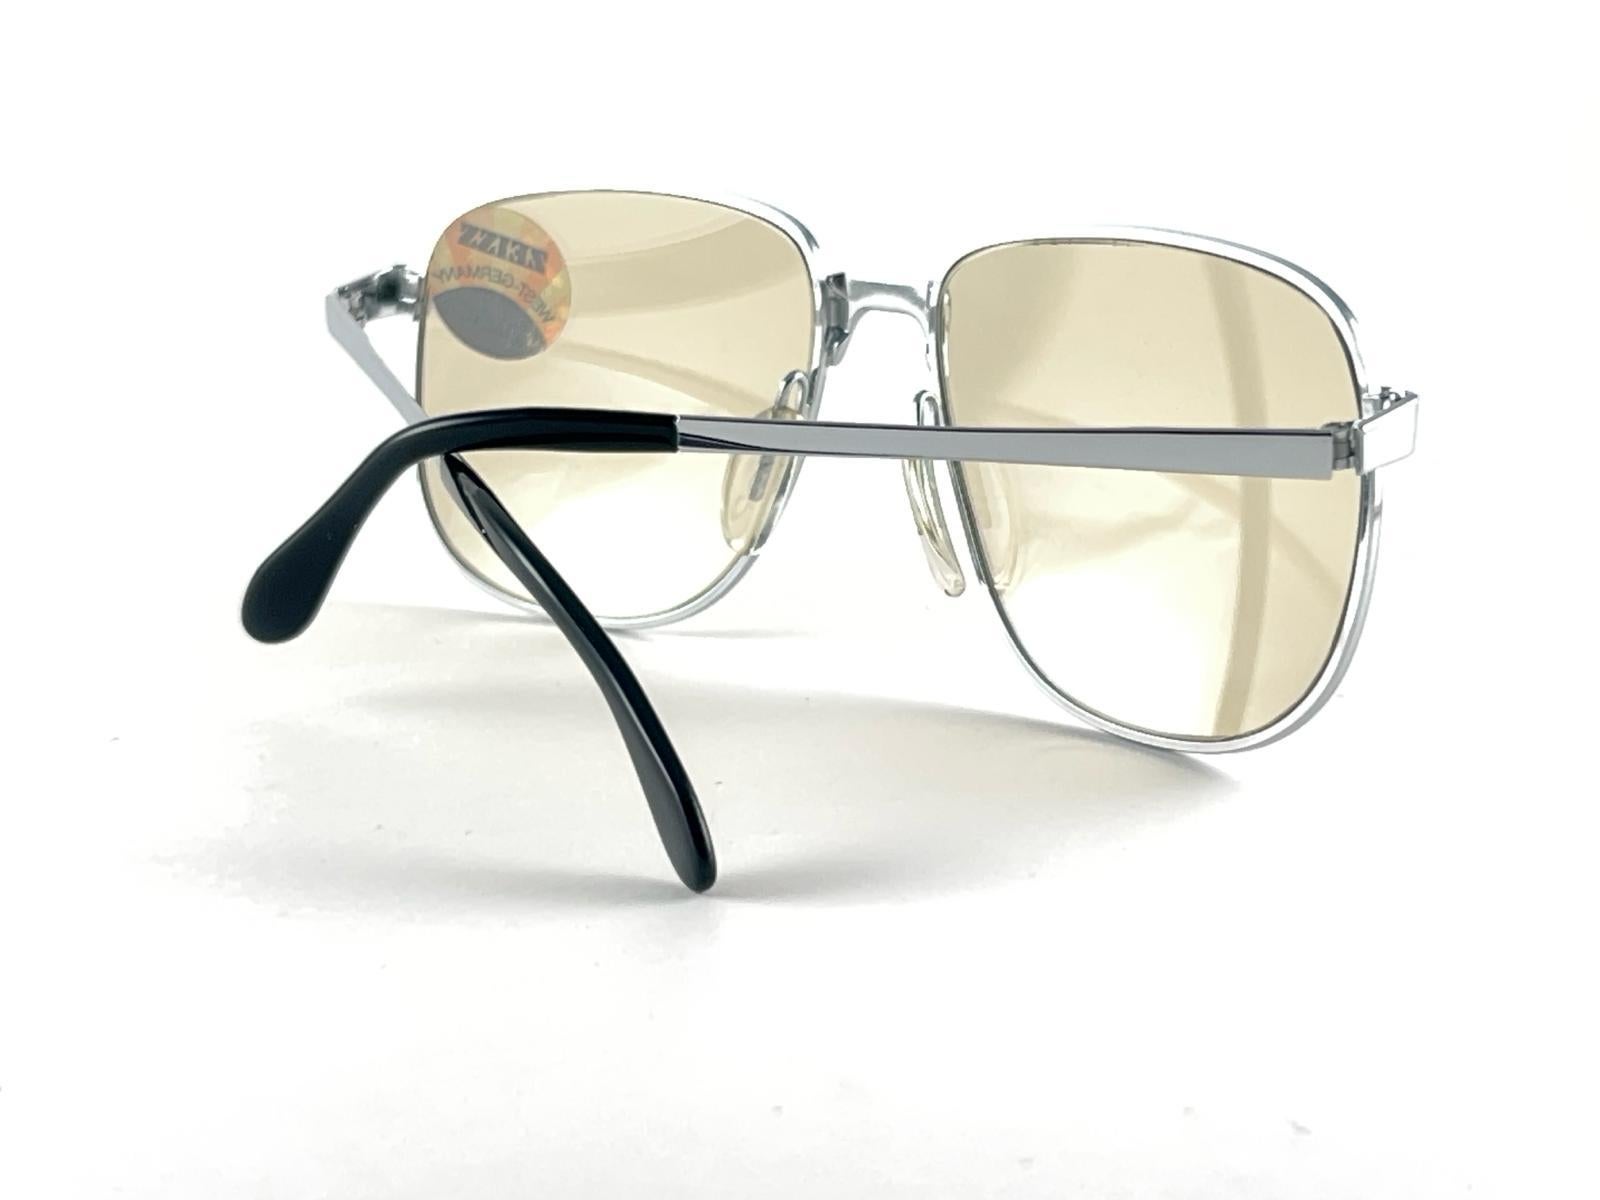 New Vintage Zeiss 9047 Silver Oversized Sunglasses Made in West Germany en vente 2